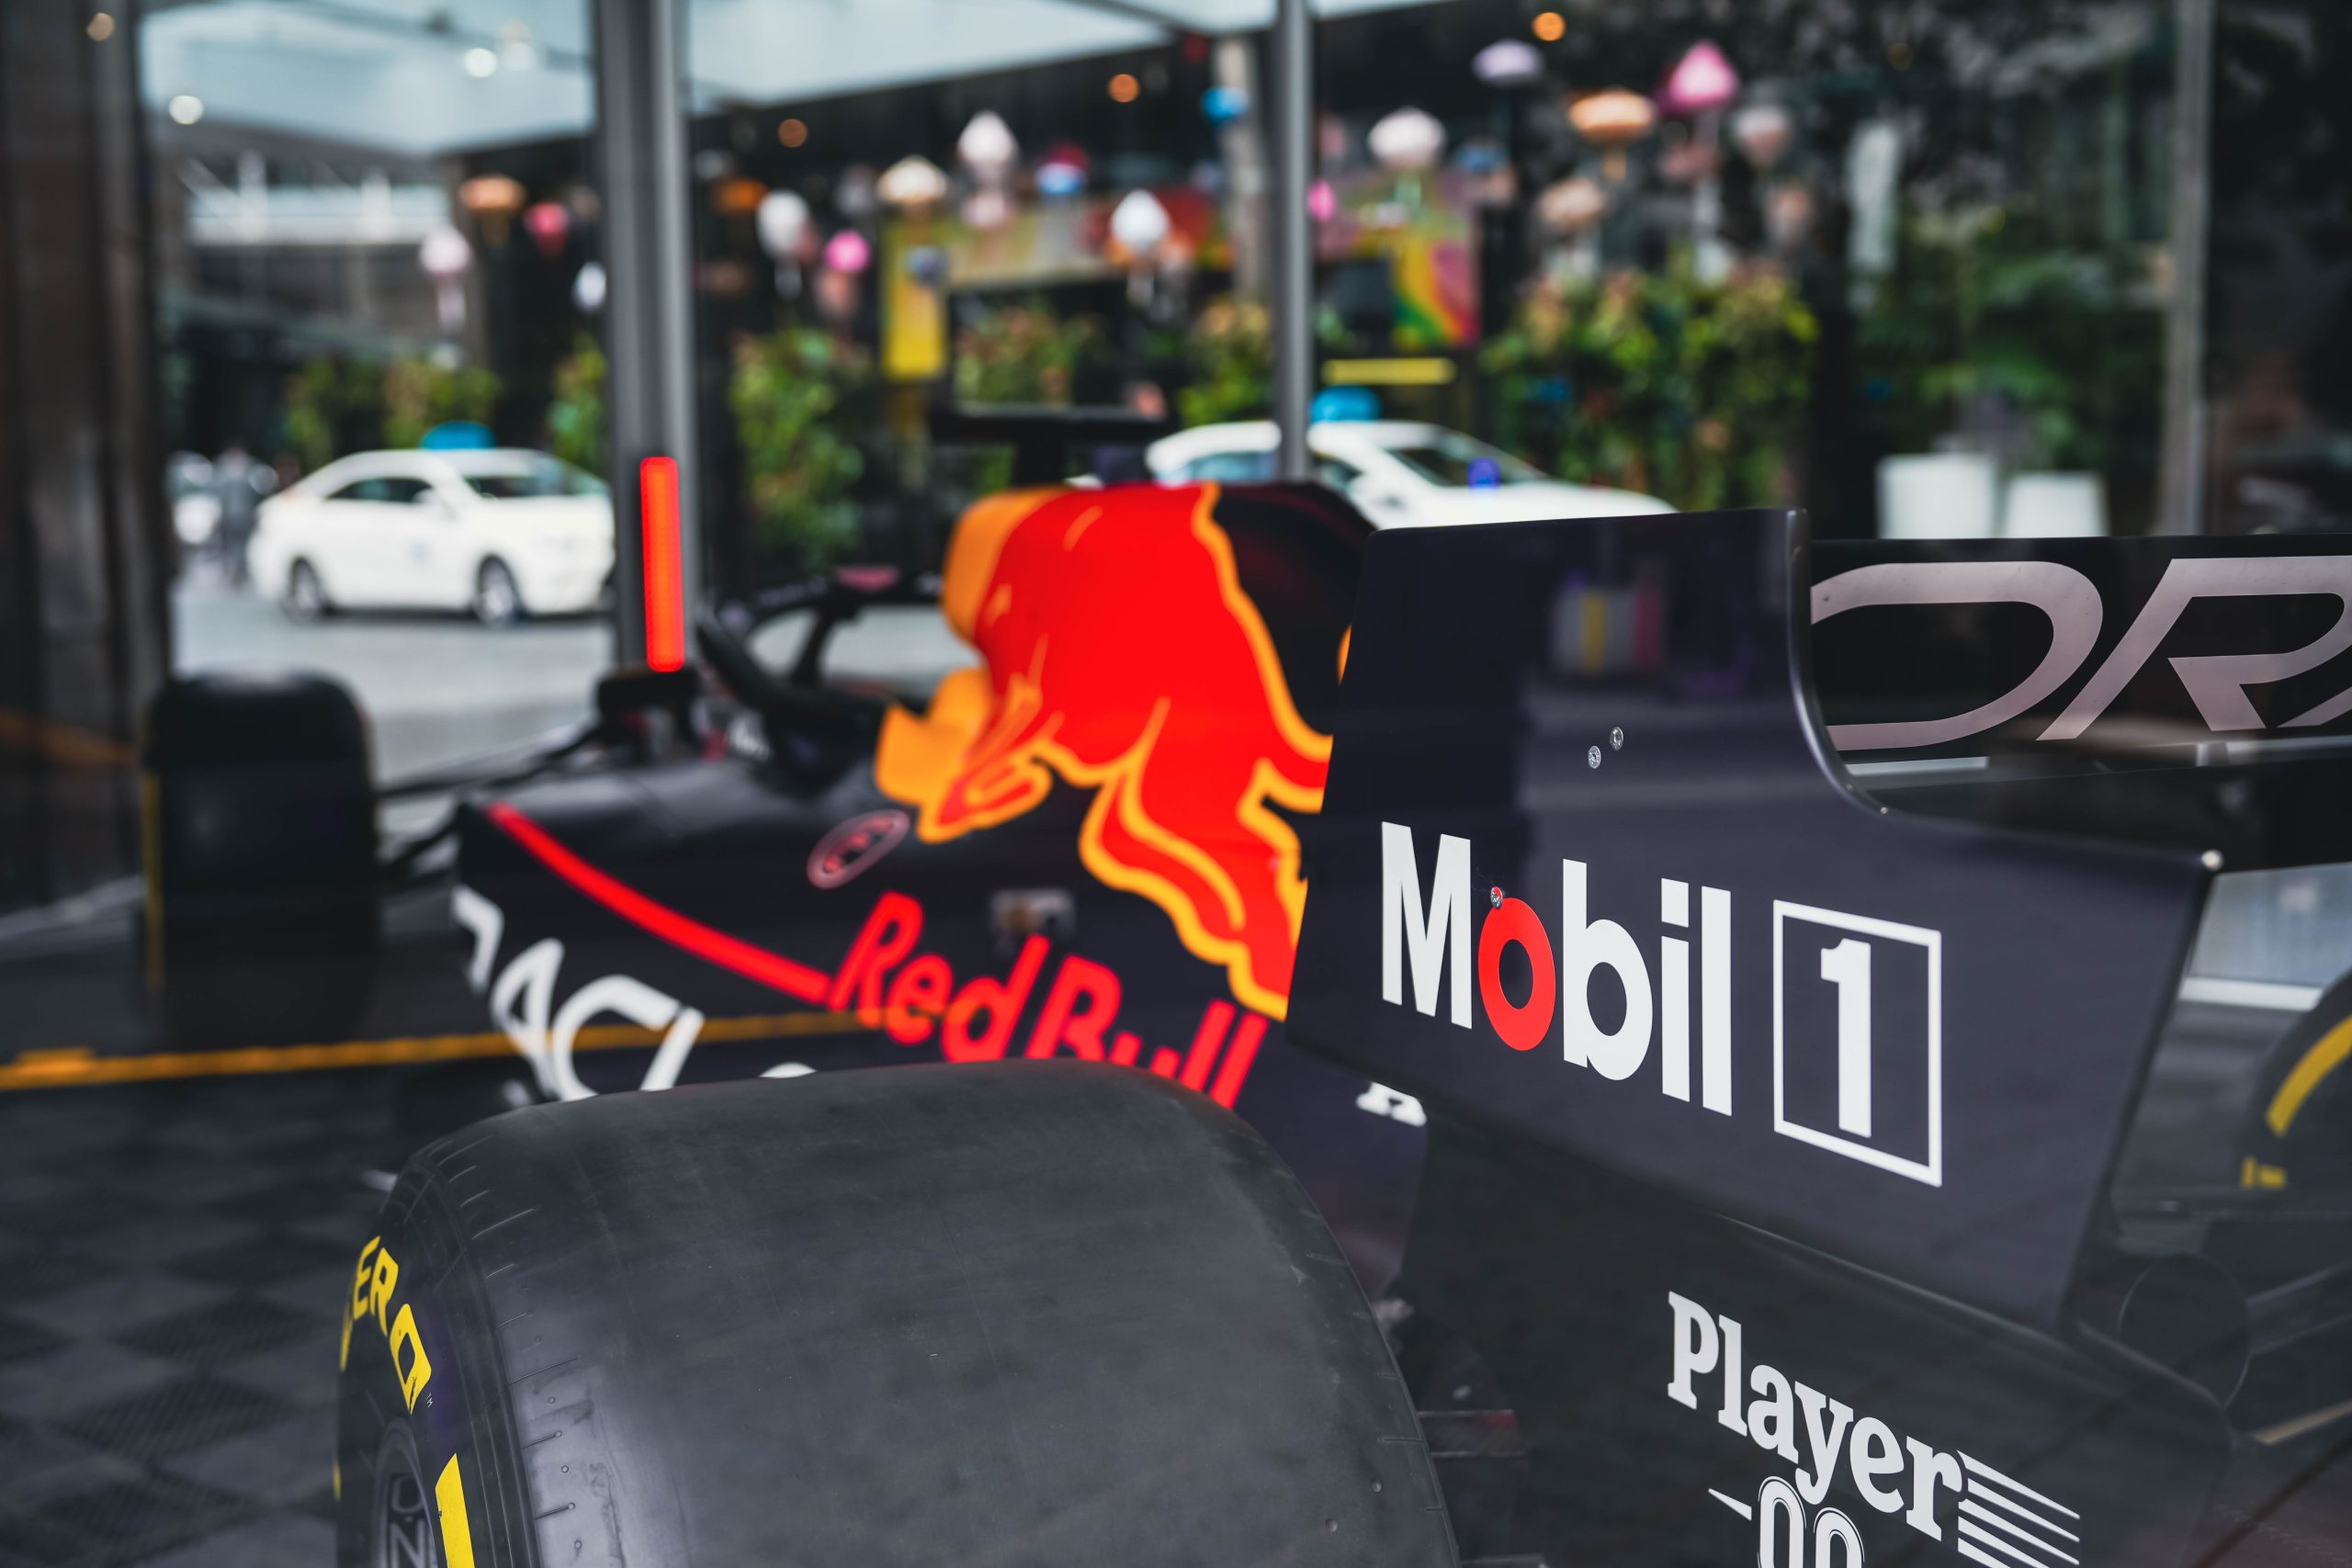 the ppf red bull f1 racing auckland new zealand